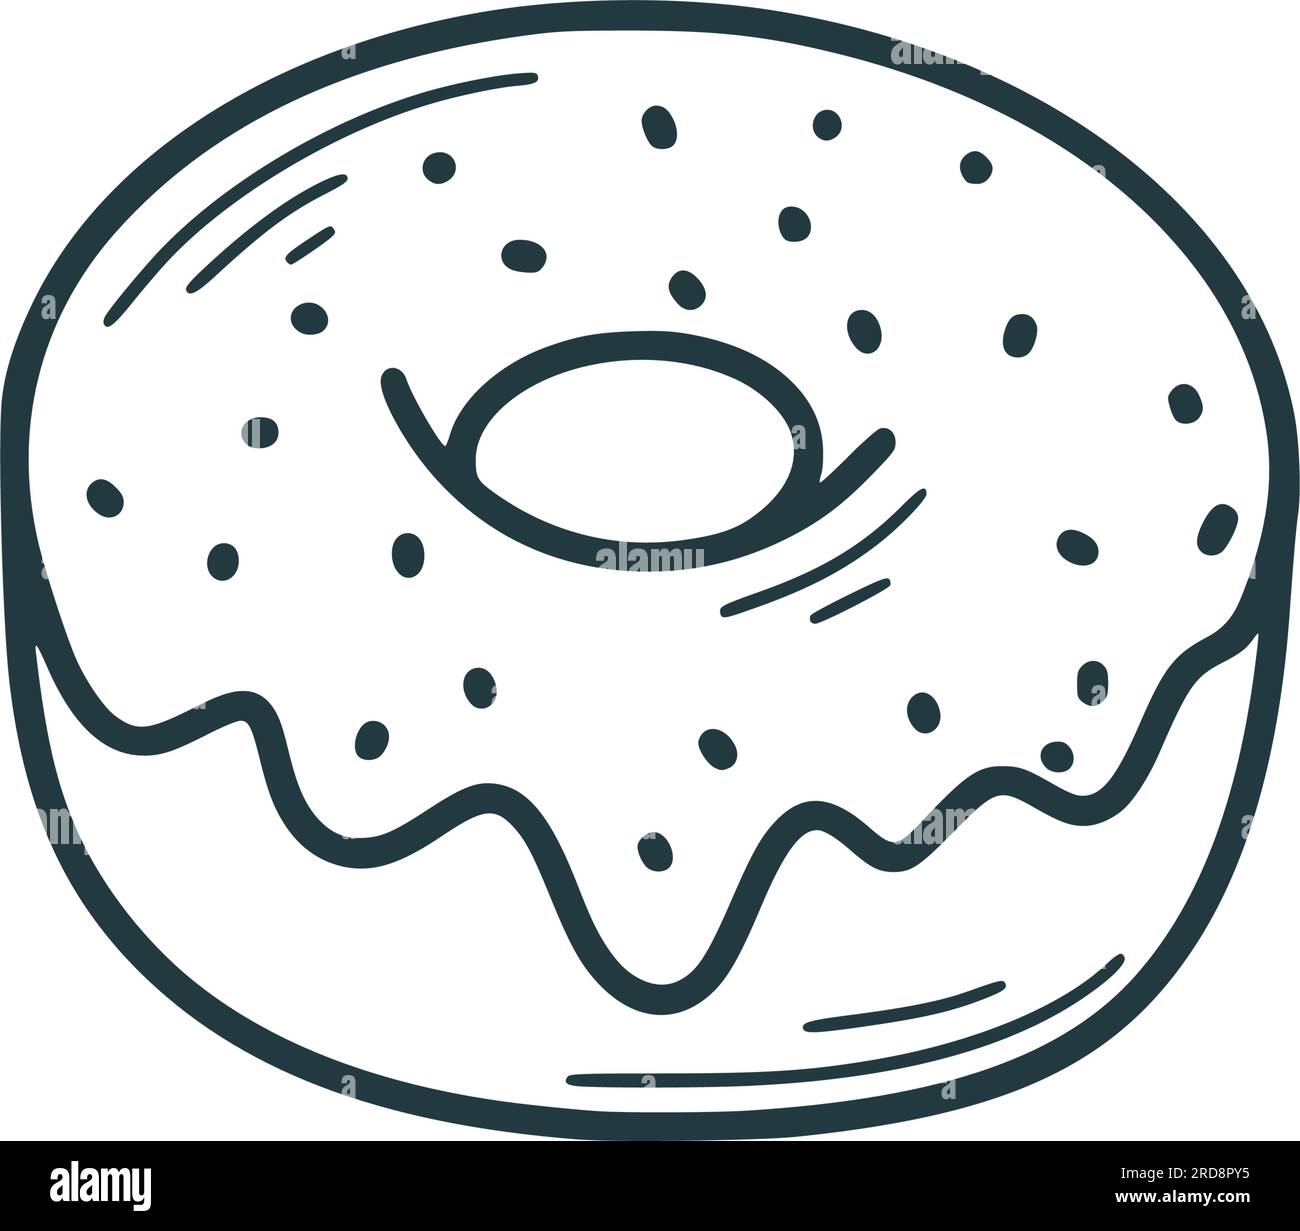 Sweet donut hand drawn clip art. Delicious pastries in glaze with sprinkles doodle style illustration. Takeaway food, bun icon. Cute round pastry Stock Vector